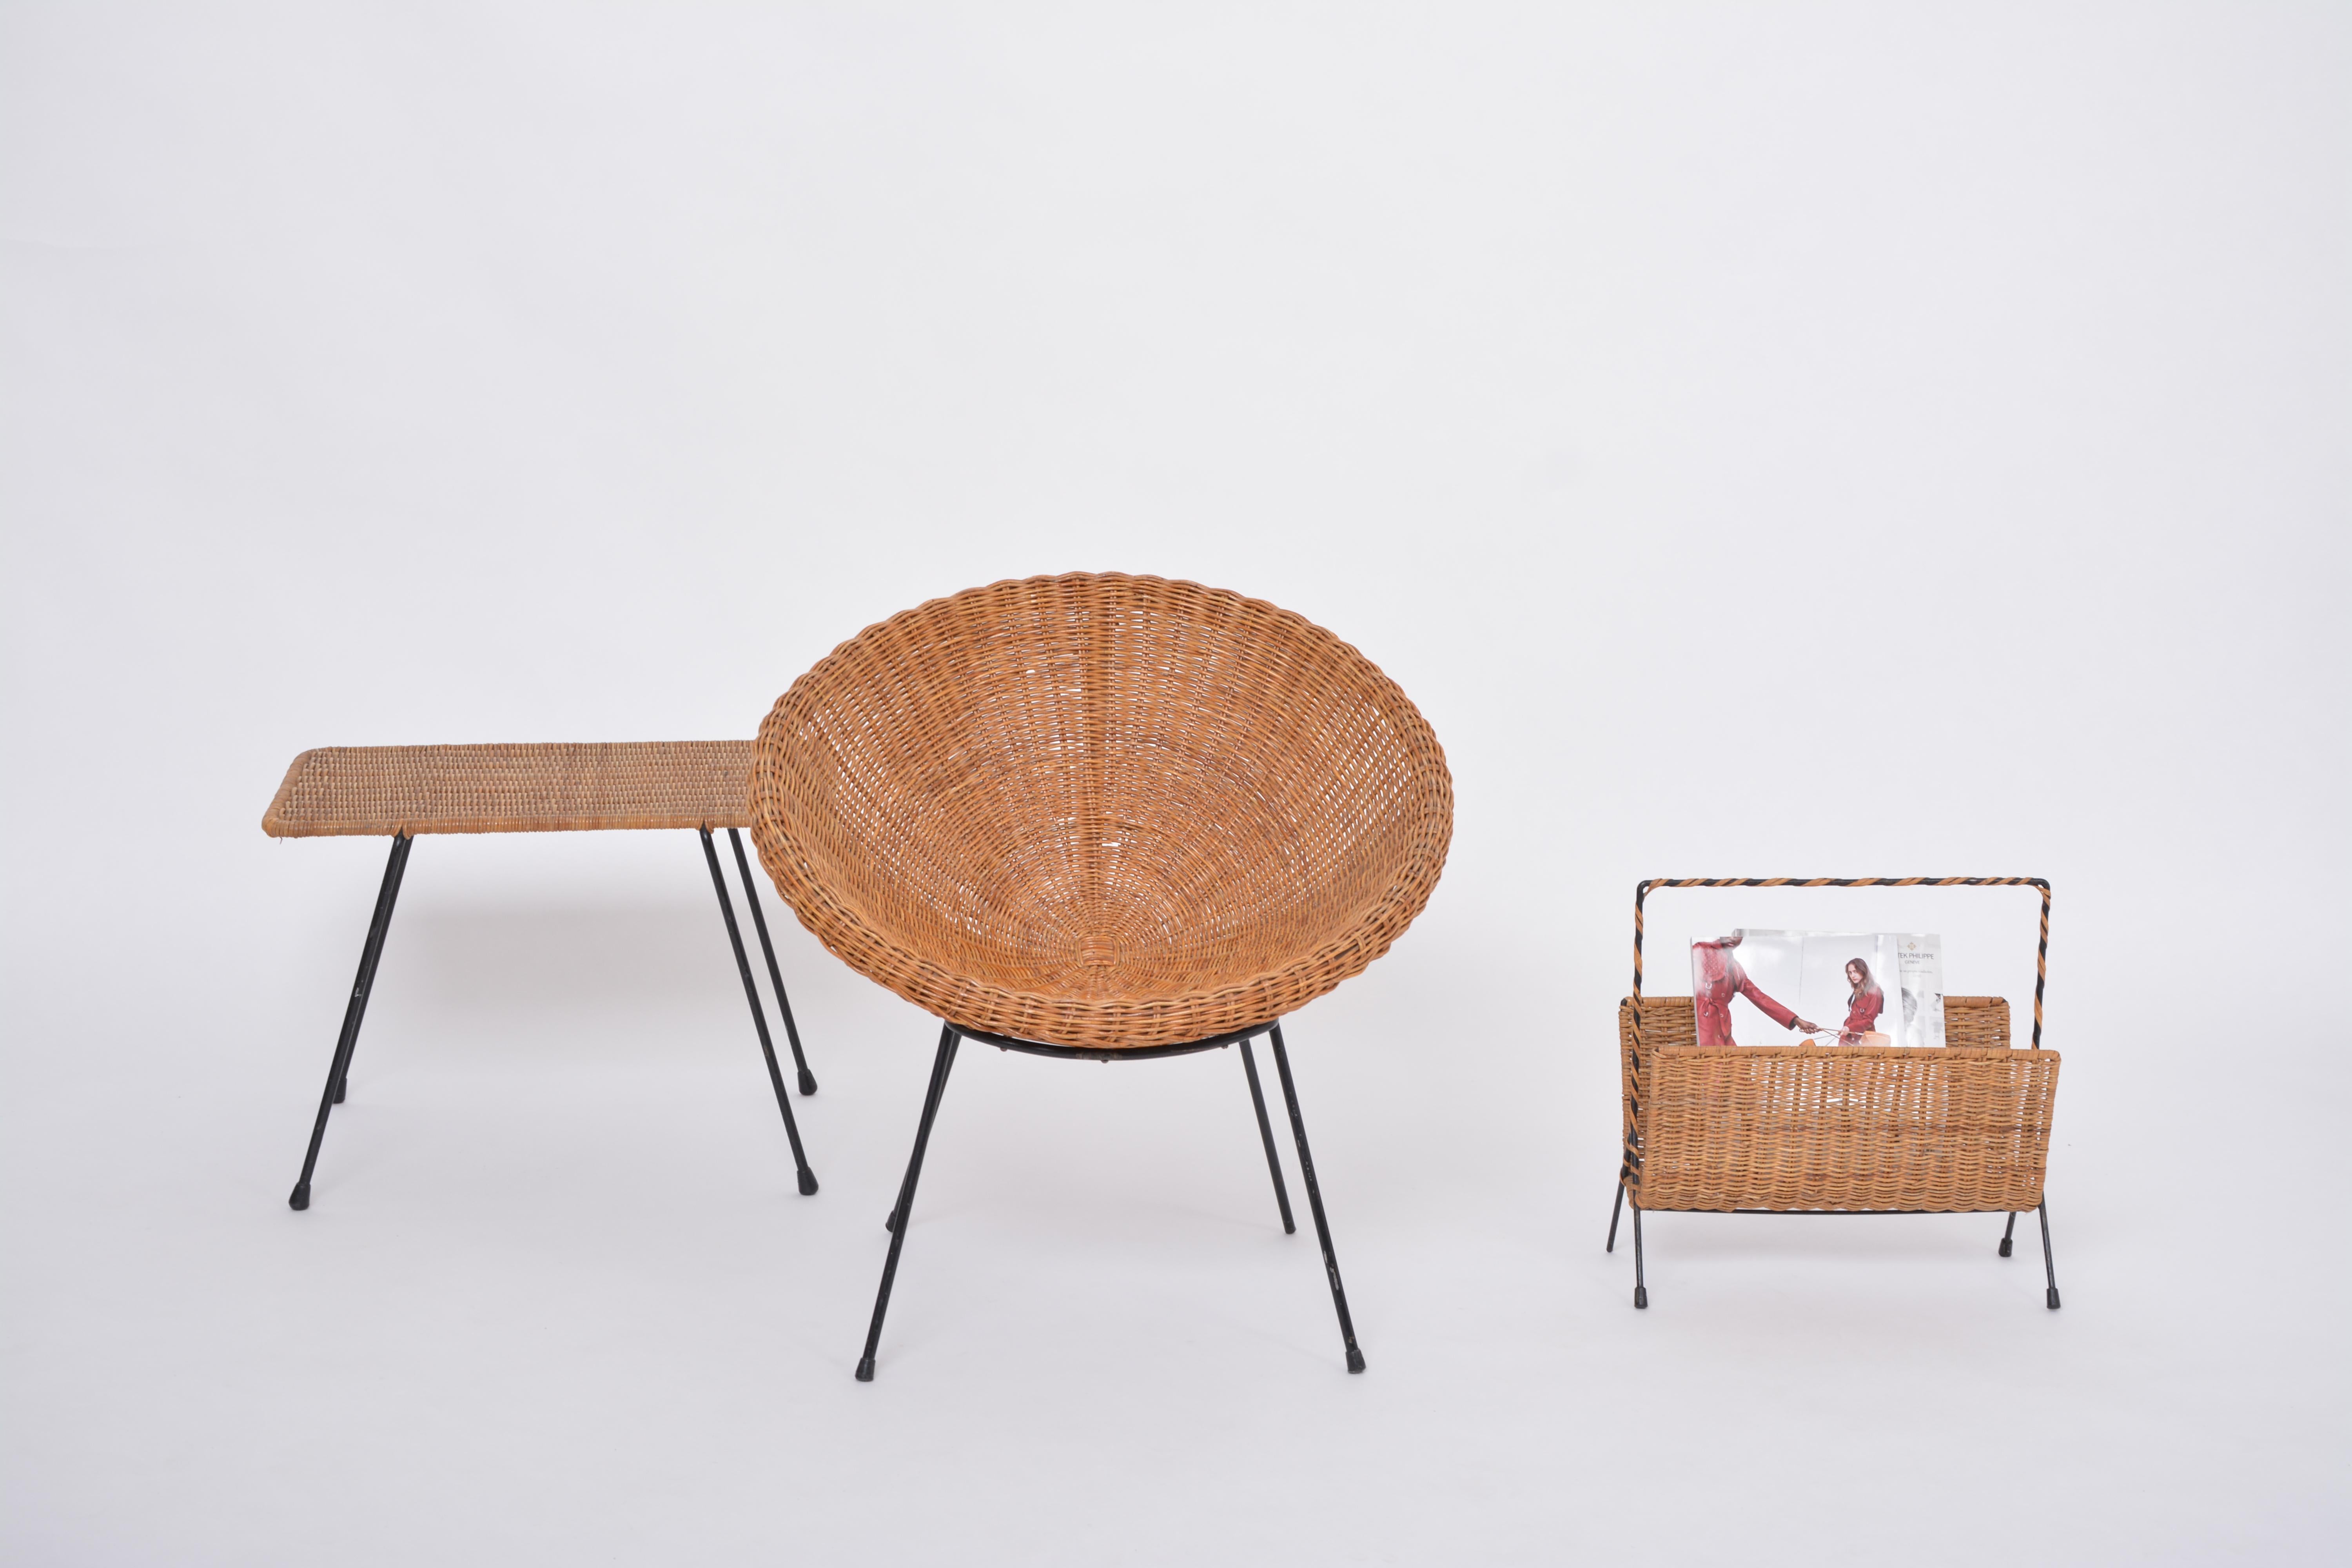 Set of Italian Mid-century Rattan Bowl Chair with side table and magazine rack

This set of rattan furniture was manufactured probably in the 1950s in Italy. 
It consists of a captivating bowl chair, a small versatile side table and a chick magazine